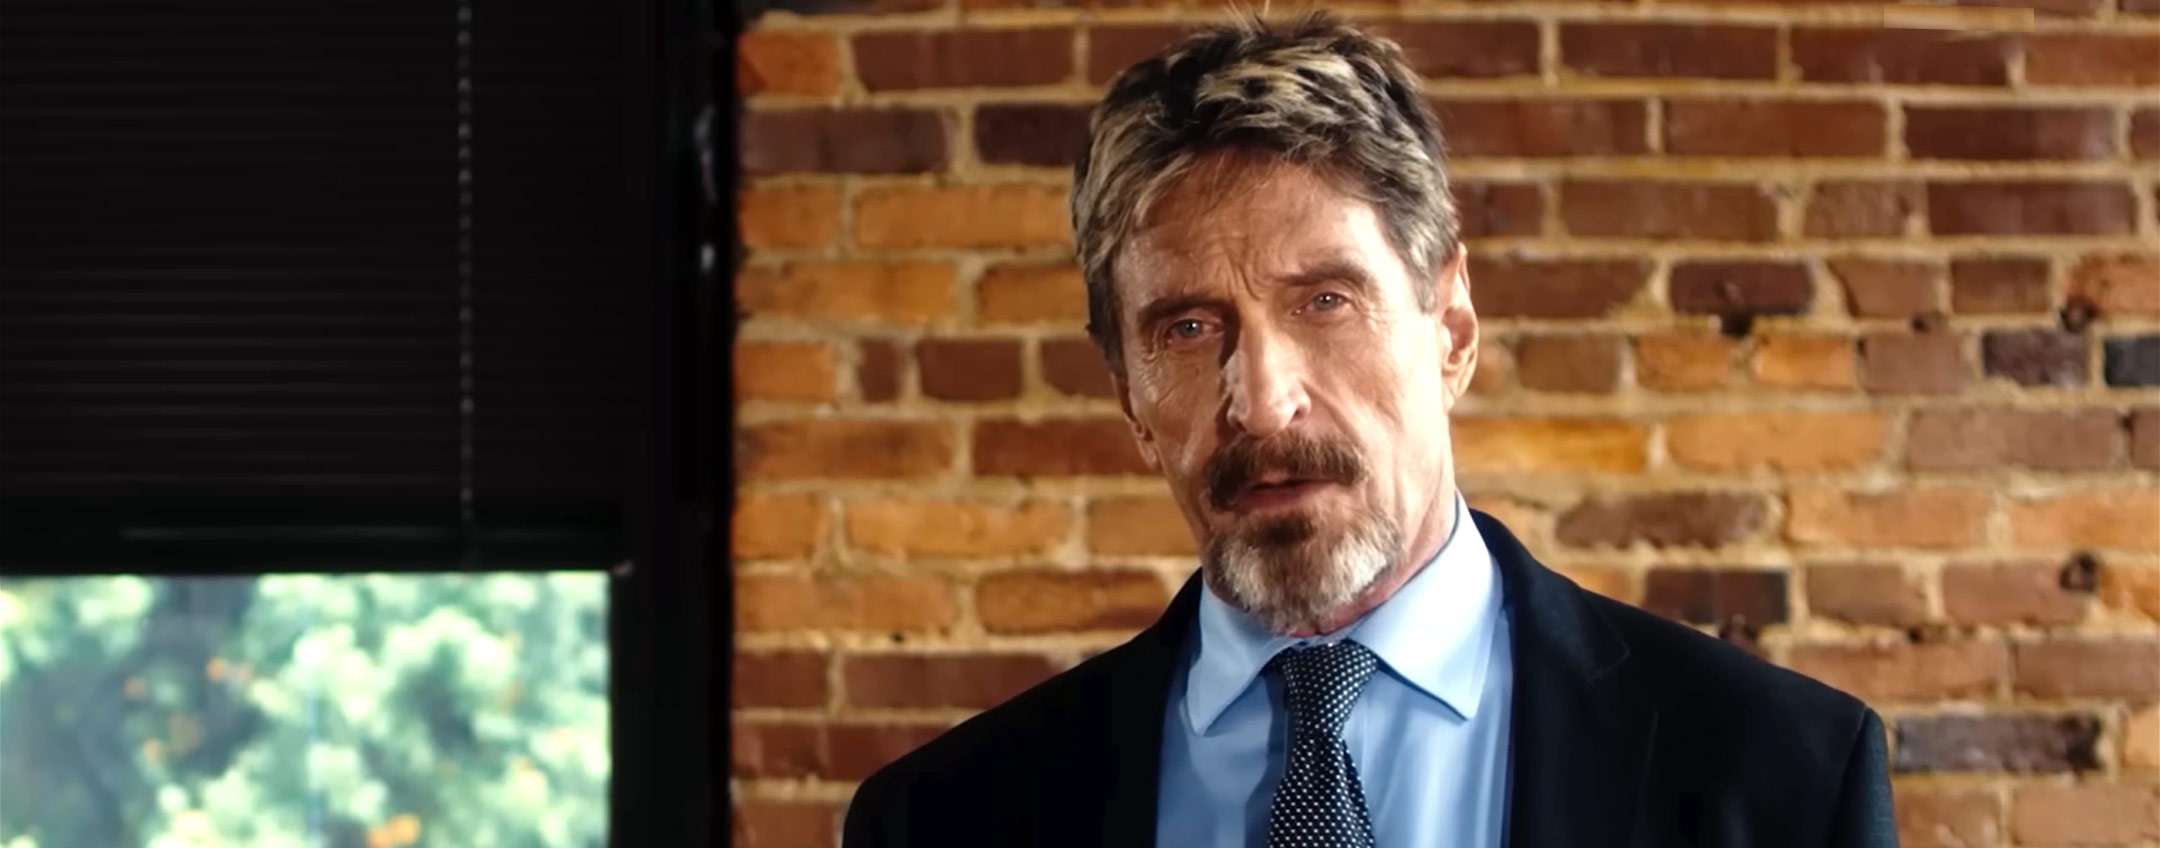 The John McAfee Story in a Netflix Documentary